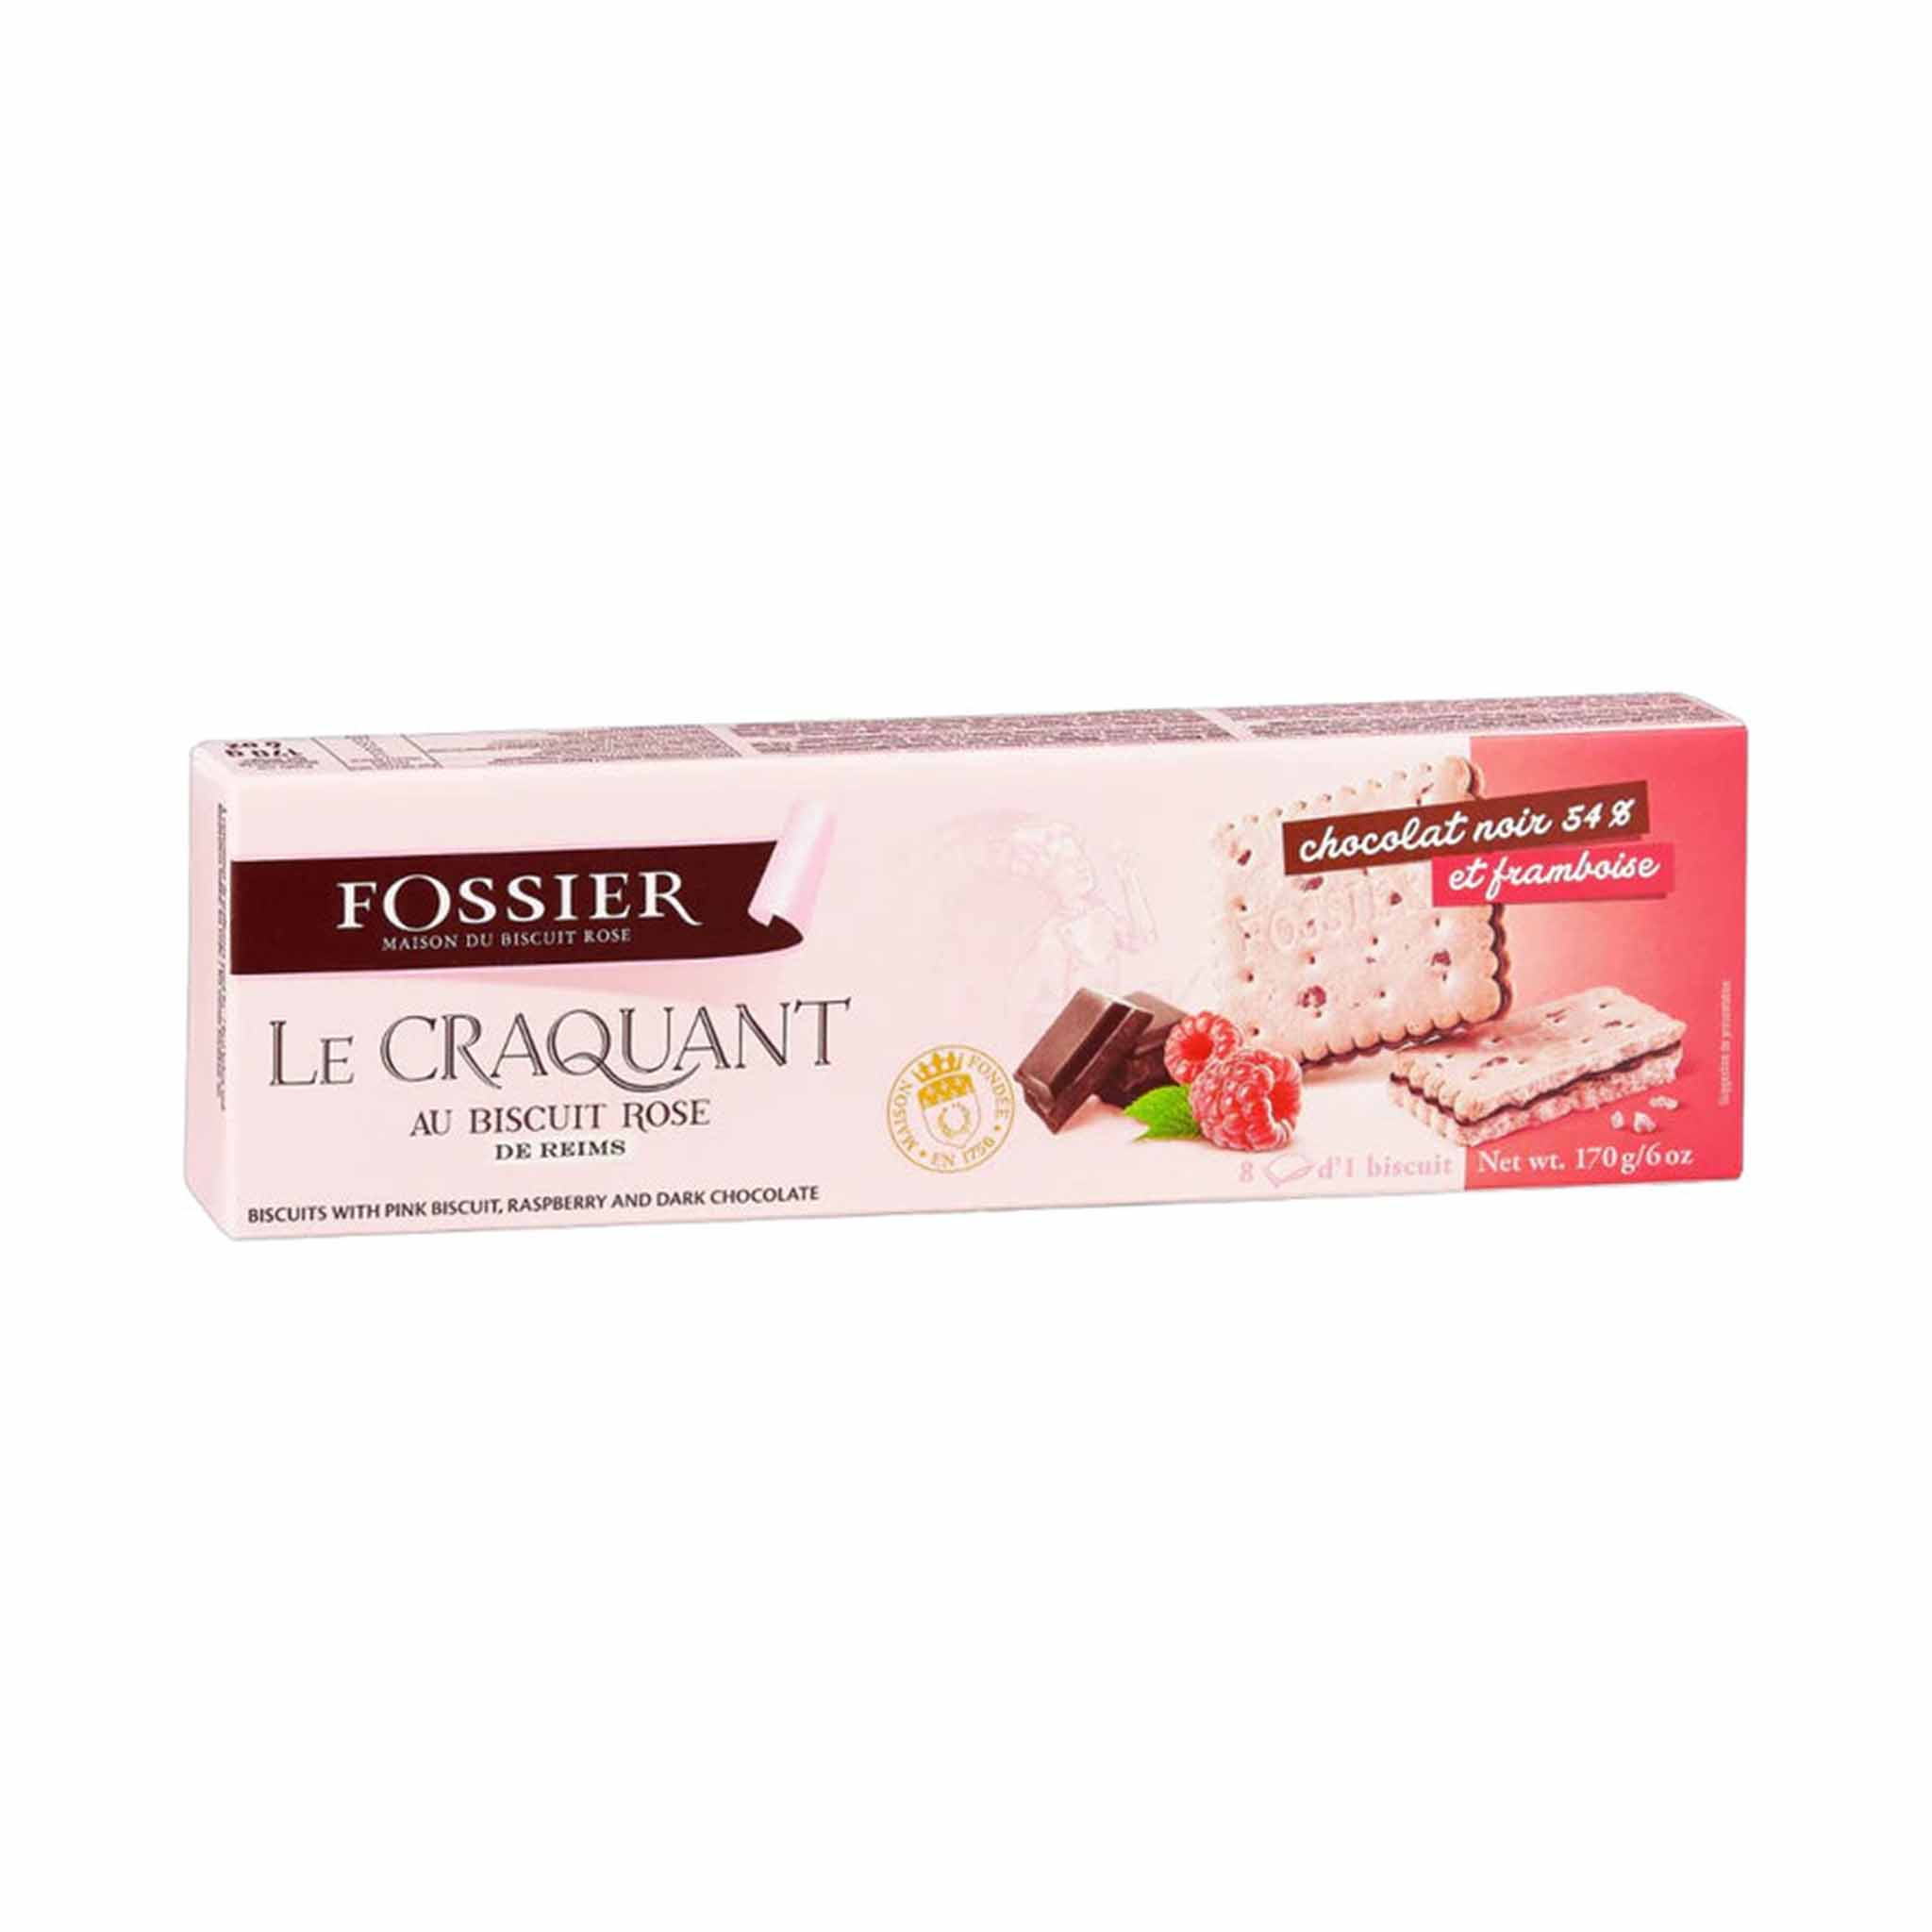 FOSSIER BISCUITS RASPBERRY CHOCOLATE 170g